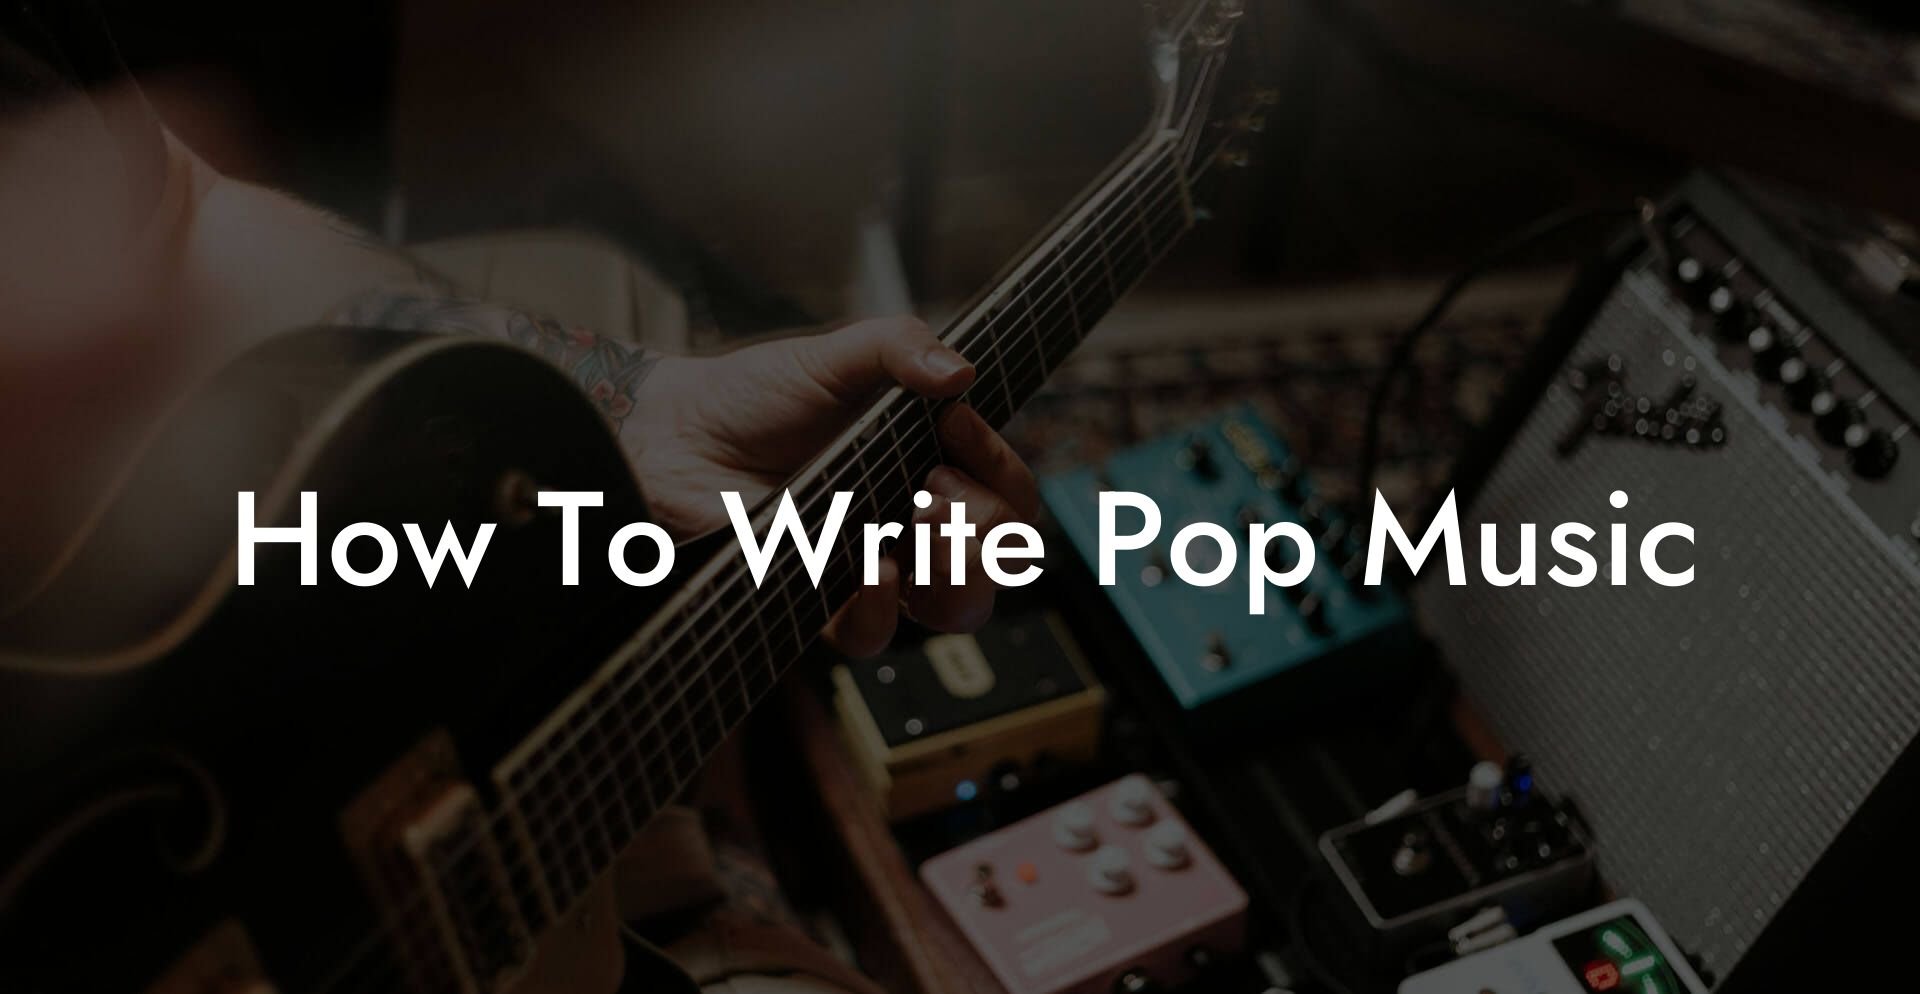 how to write pop music lyric assistant